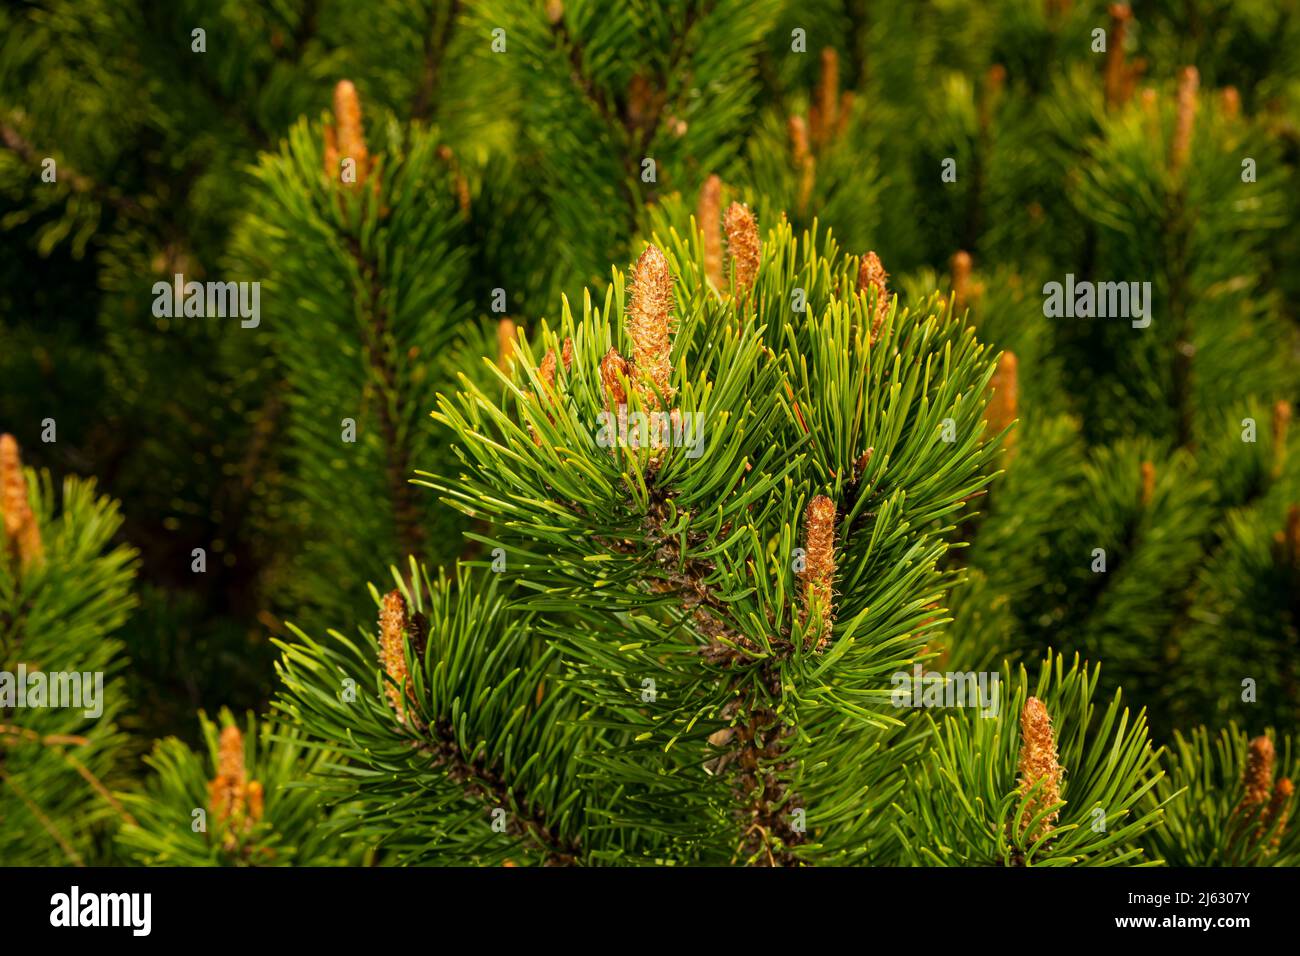 Young shoots of pine in sunny weather in the botanical garden Stock Photo